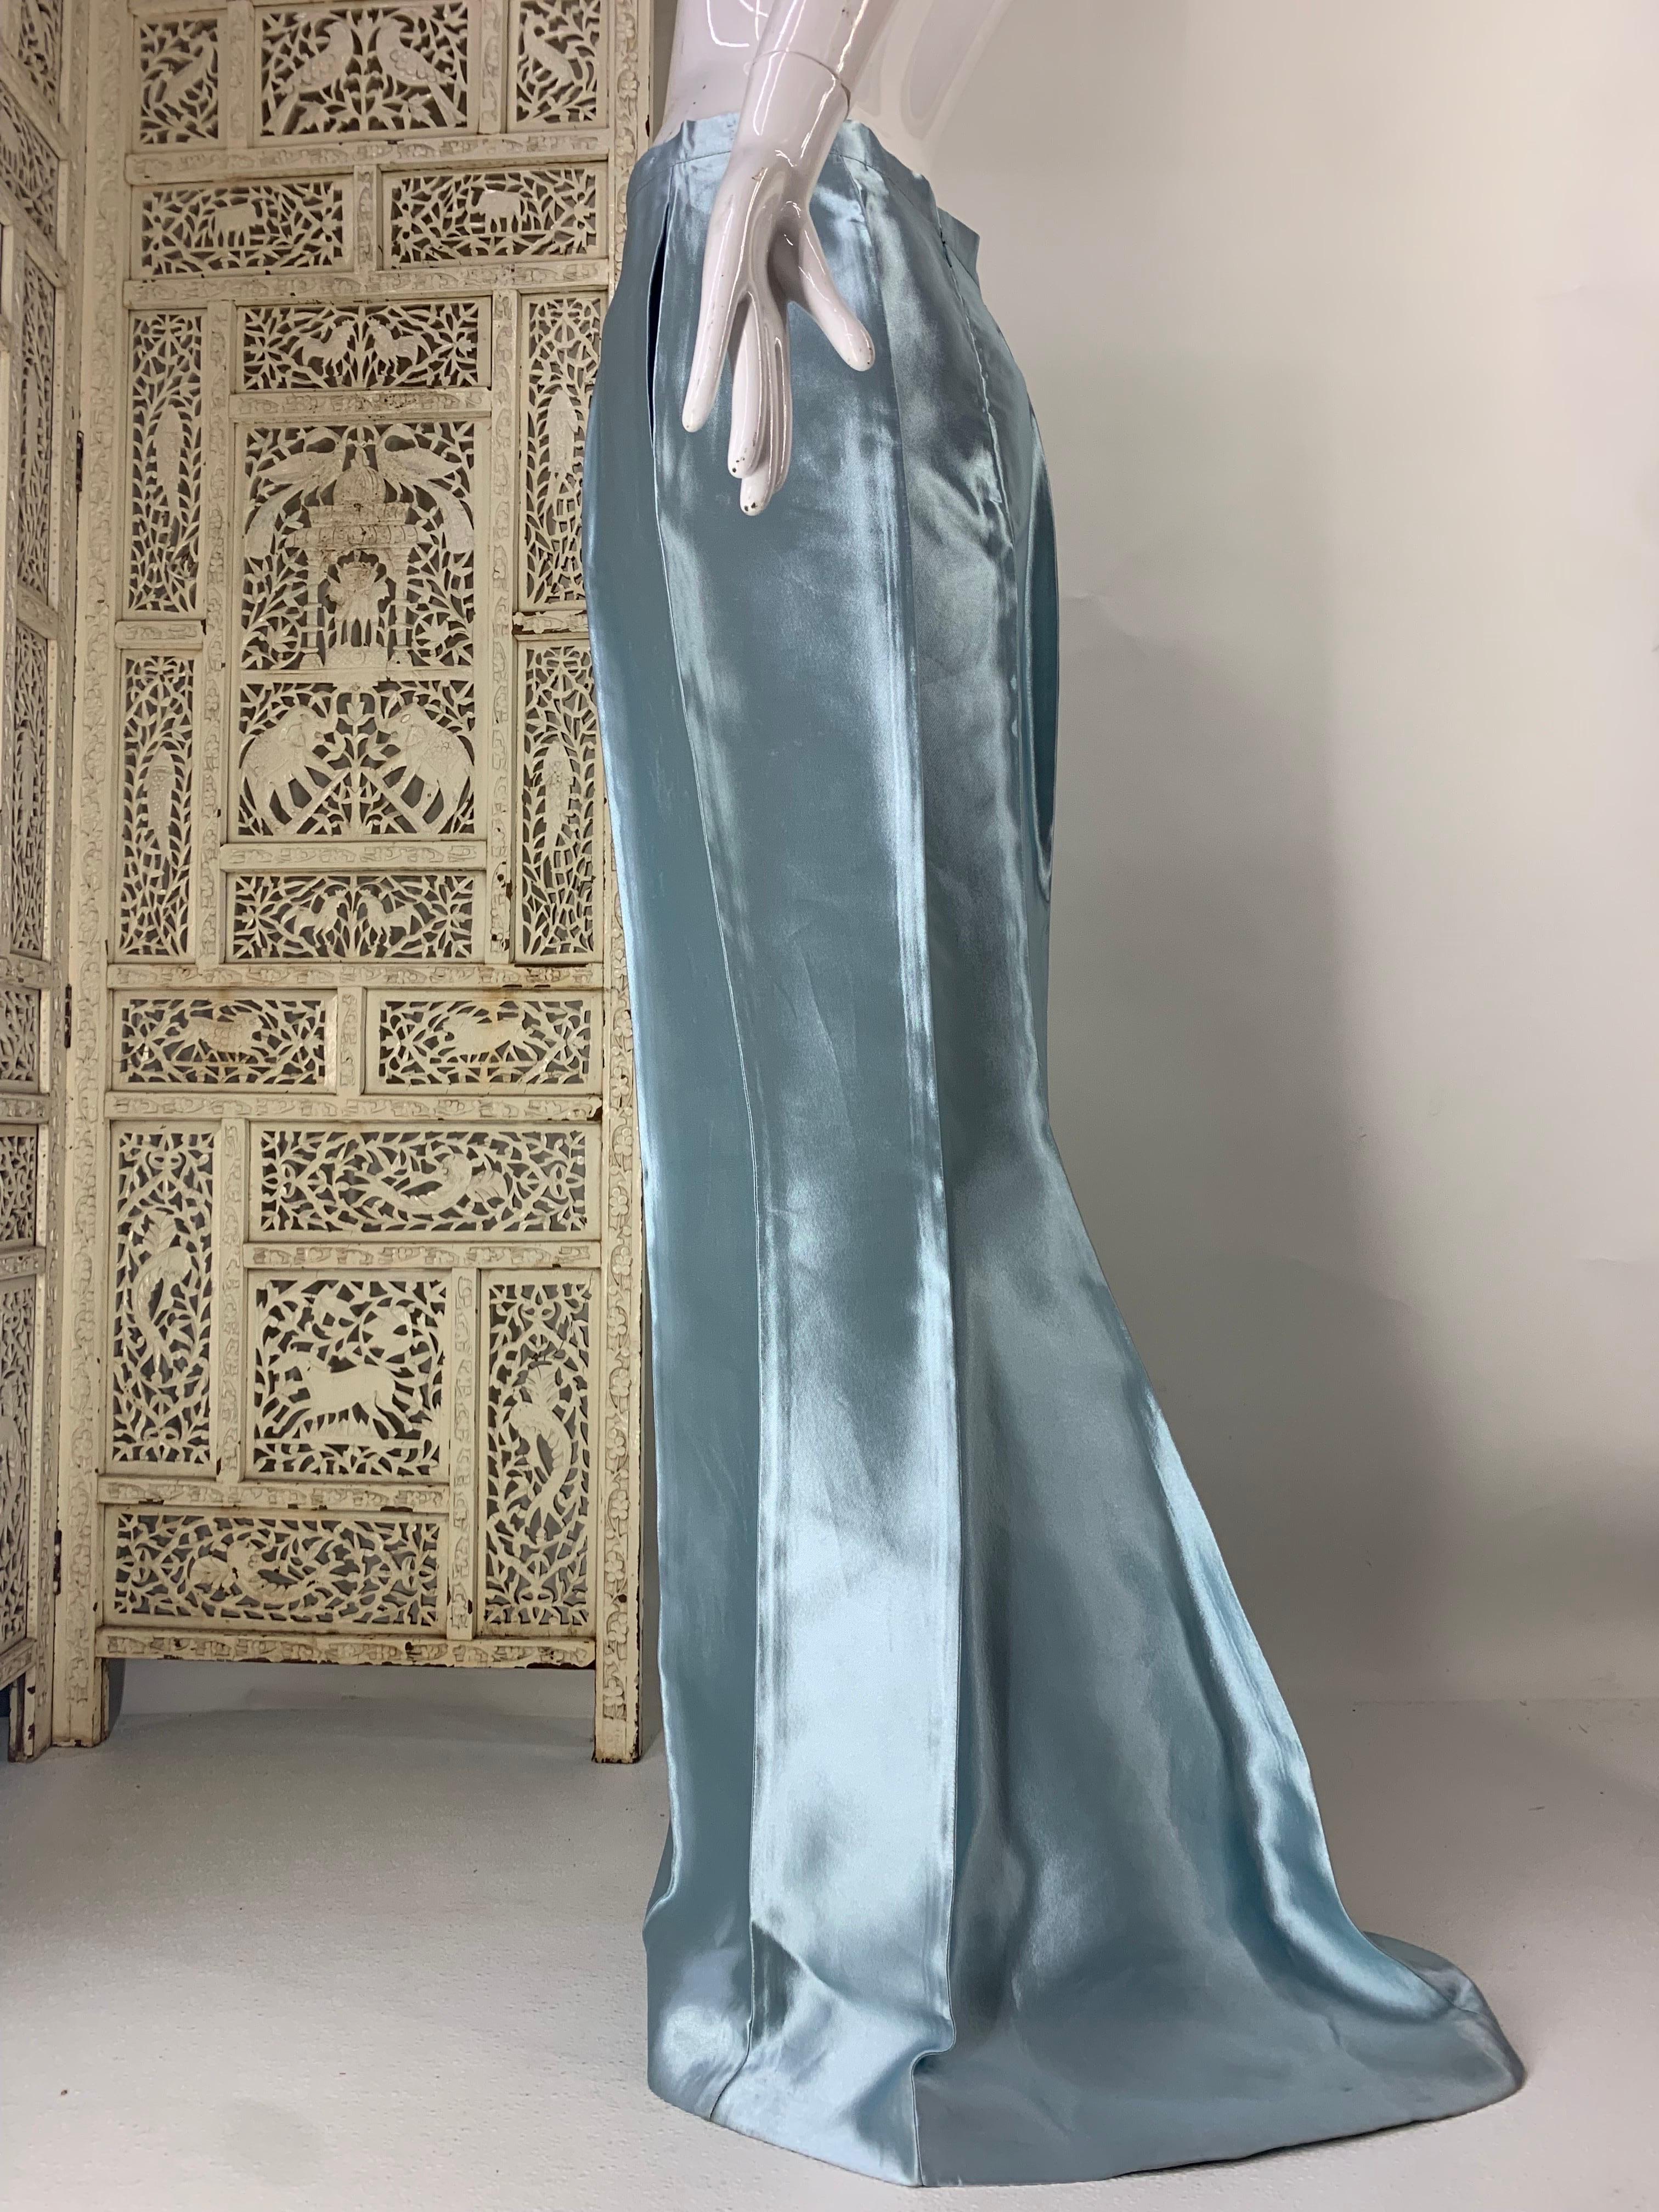 1990s Gianfranco Ferre Ice Blue Shark Skin Fishtail Full Length Skirt: A fantastic start for a holiday soiree ensemble. Can be worn with a tailored shirt or spangles. Size US 10.